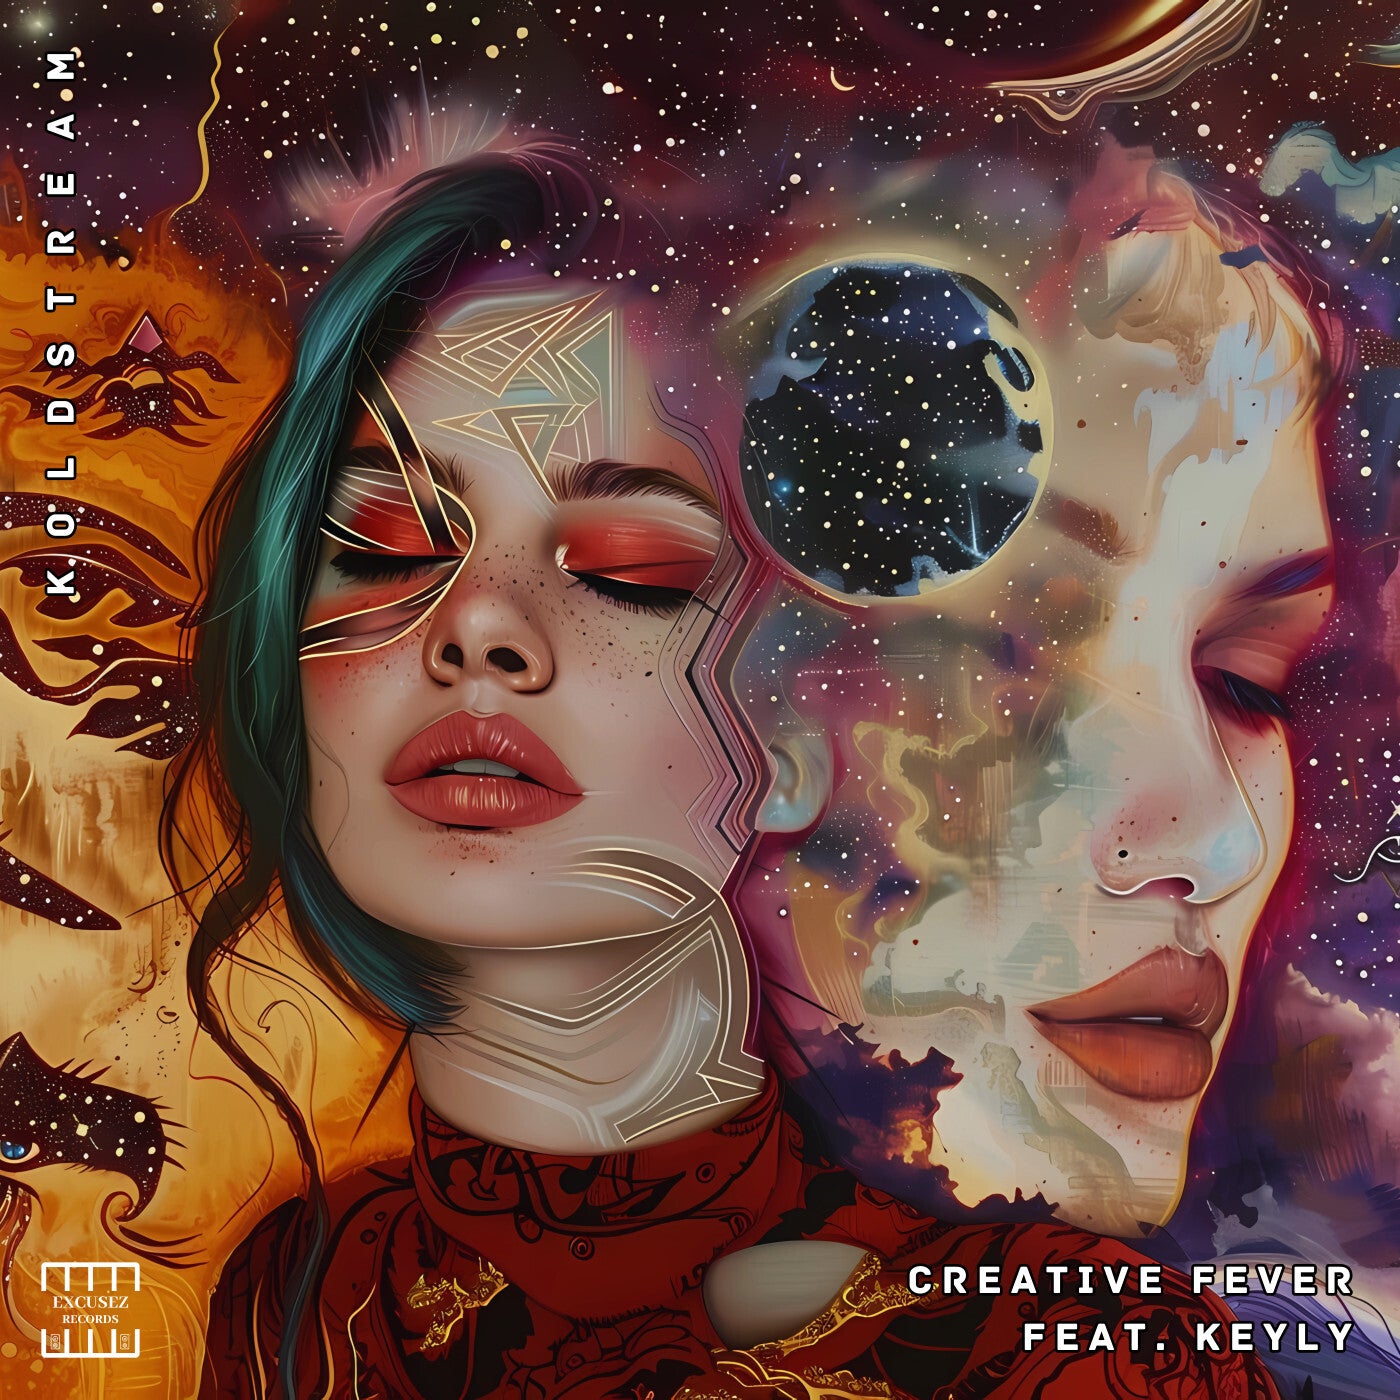 Creative Fever (feat. KeyLY)